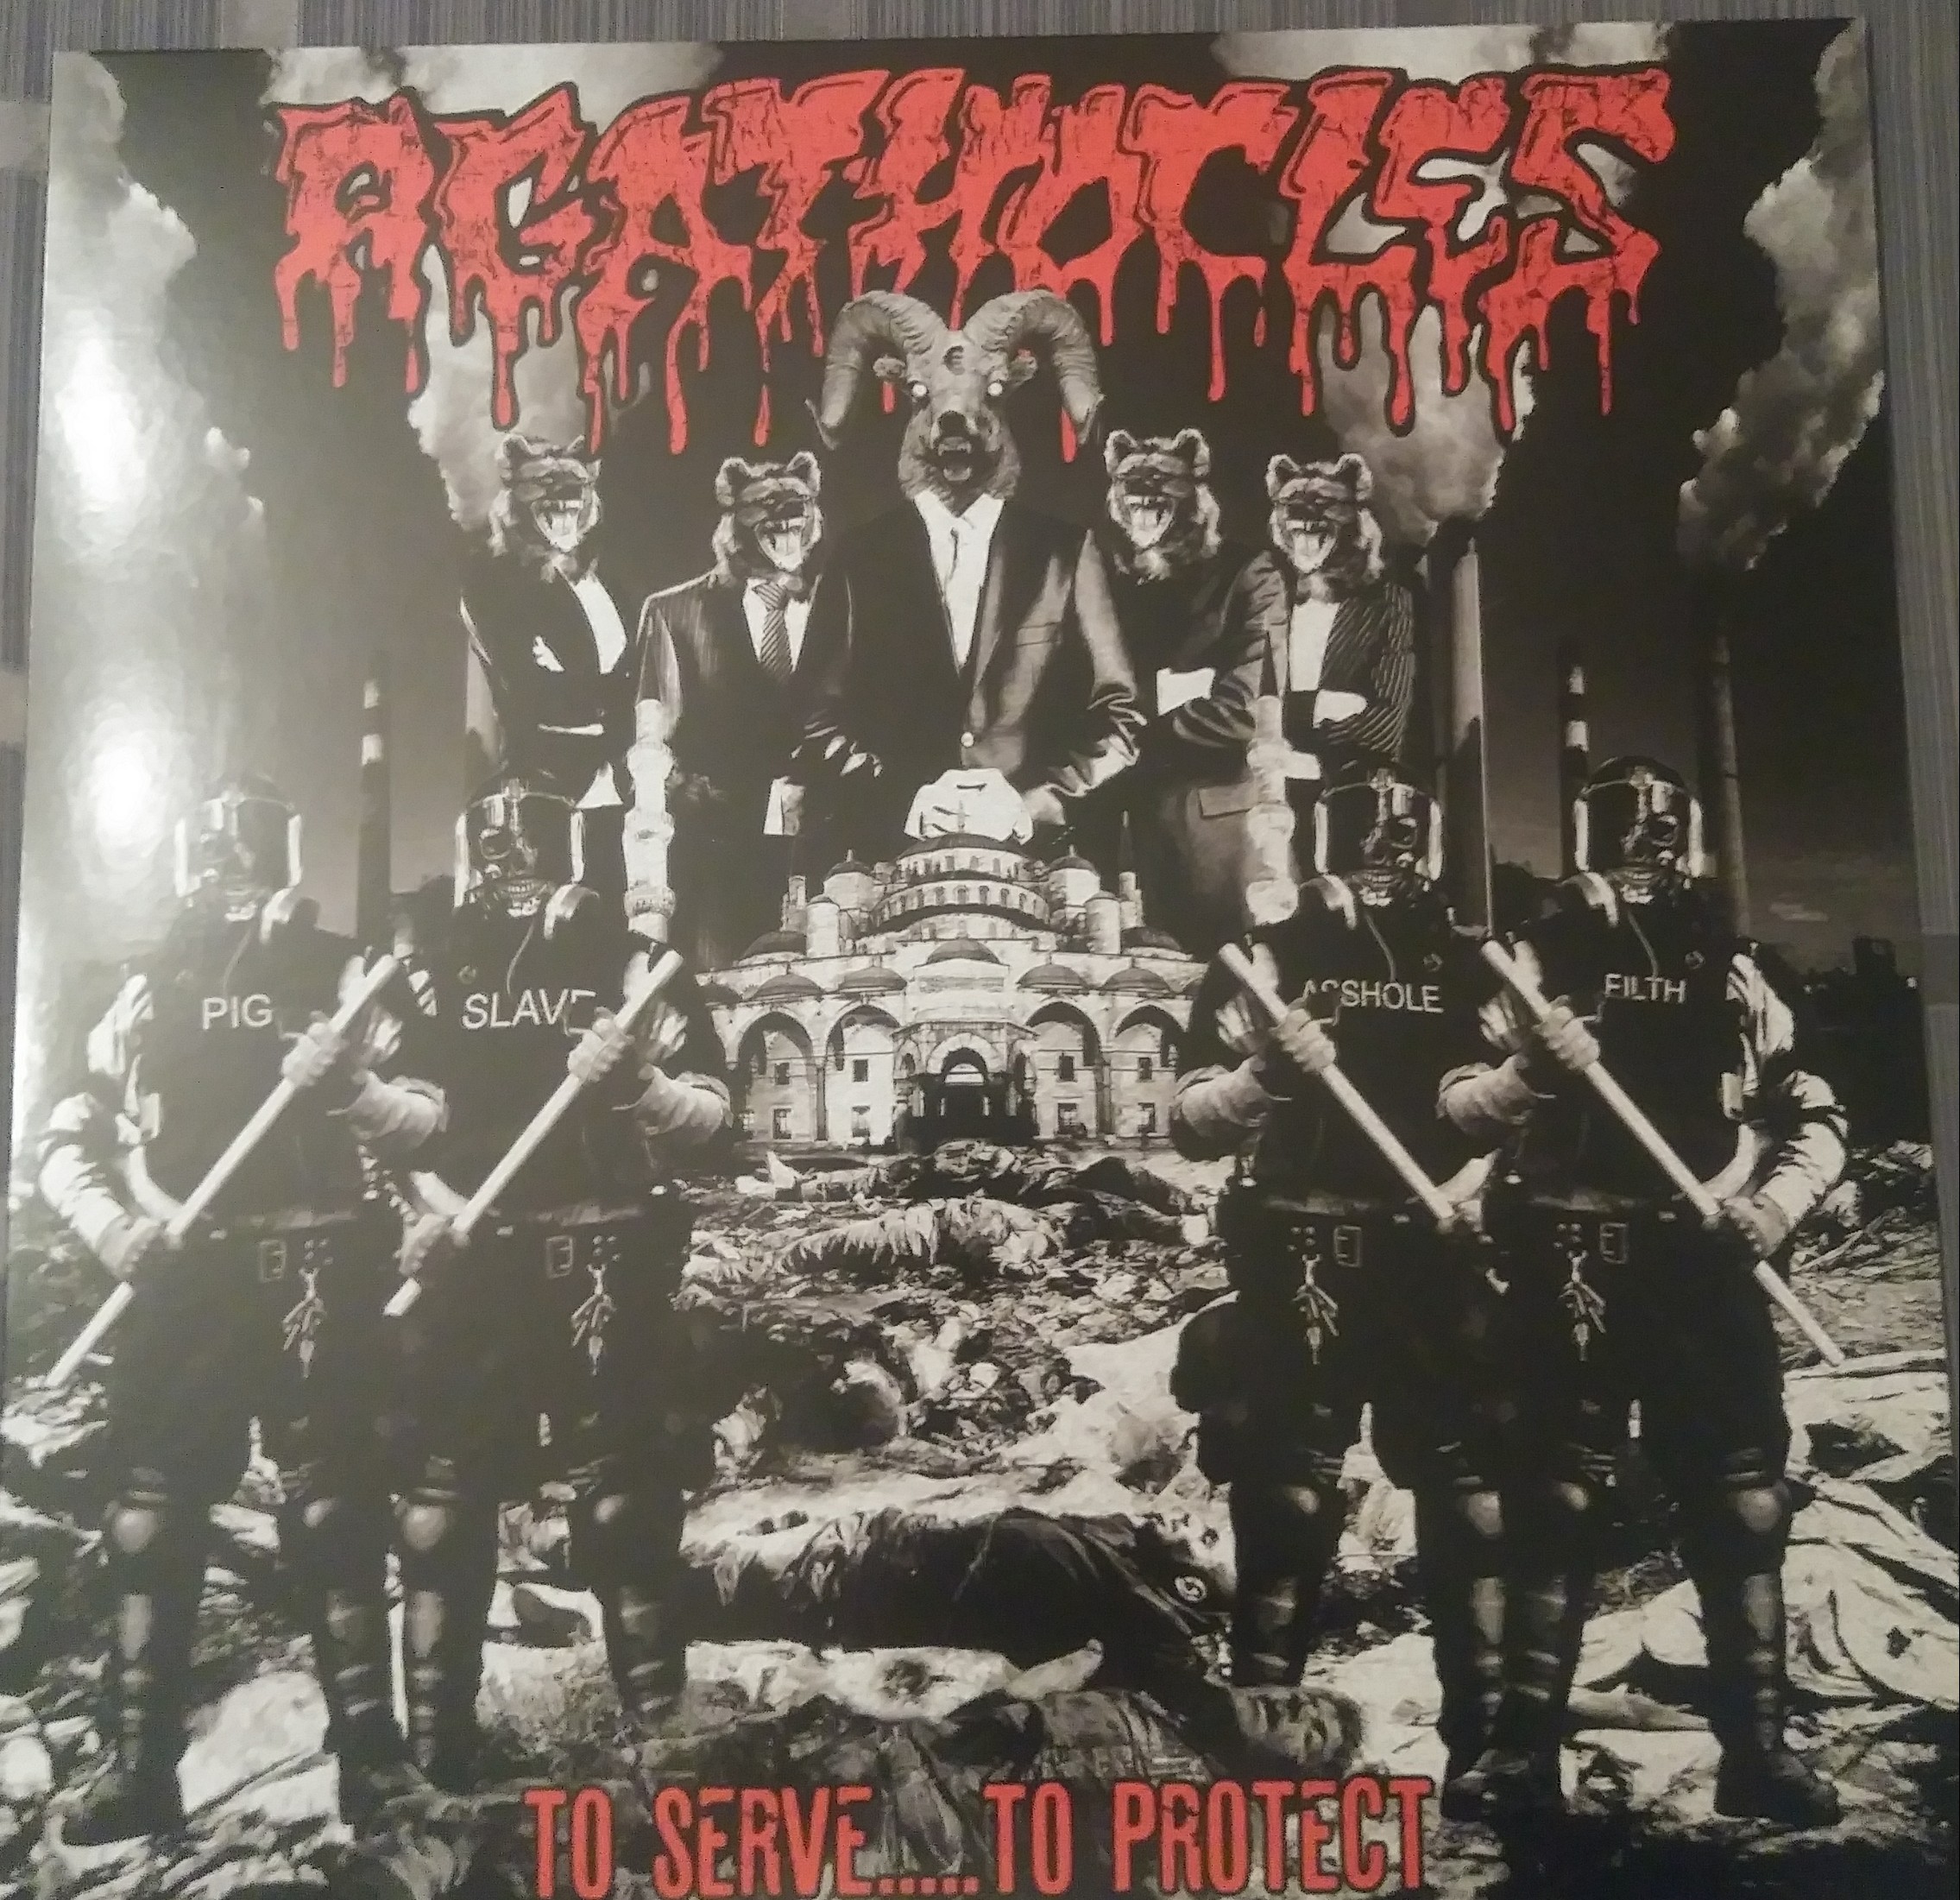 AGATHOCLES - "TO SERVE.....TO PROTECT" LP